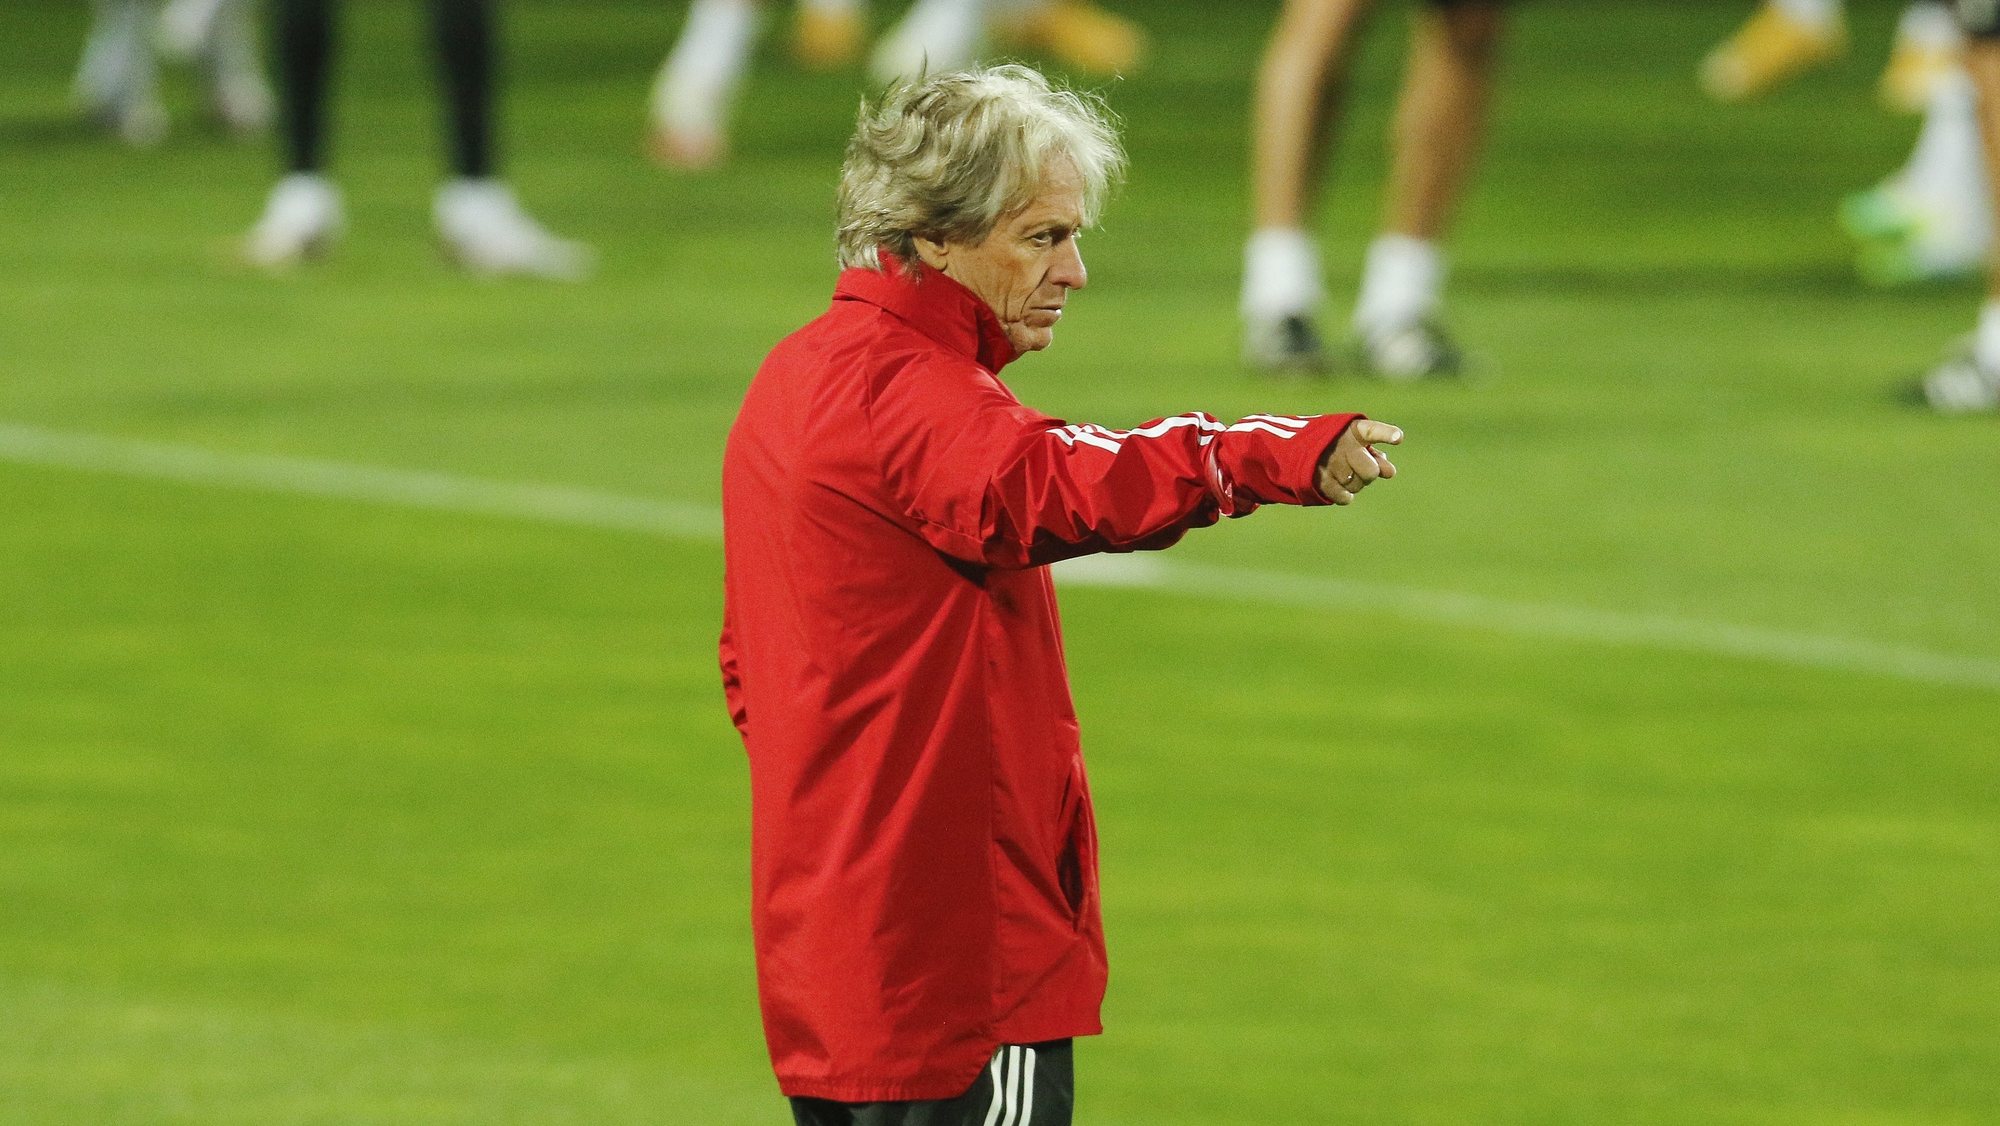 Benfica headcoach Jorge Jesus during a training session in Seixal, near Lisbon, Portugal, 4th October 2020. Benfica will face Rangers in their UEFA Matchday 3 of the Europa League Group D soccer match at Luz Stadium on 5th October. RUI MINDERICO/LUSA